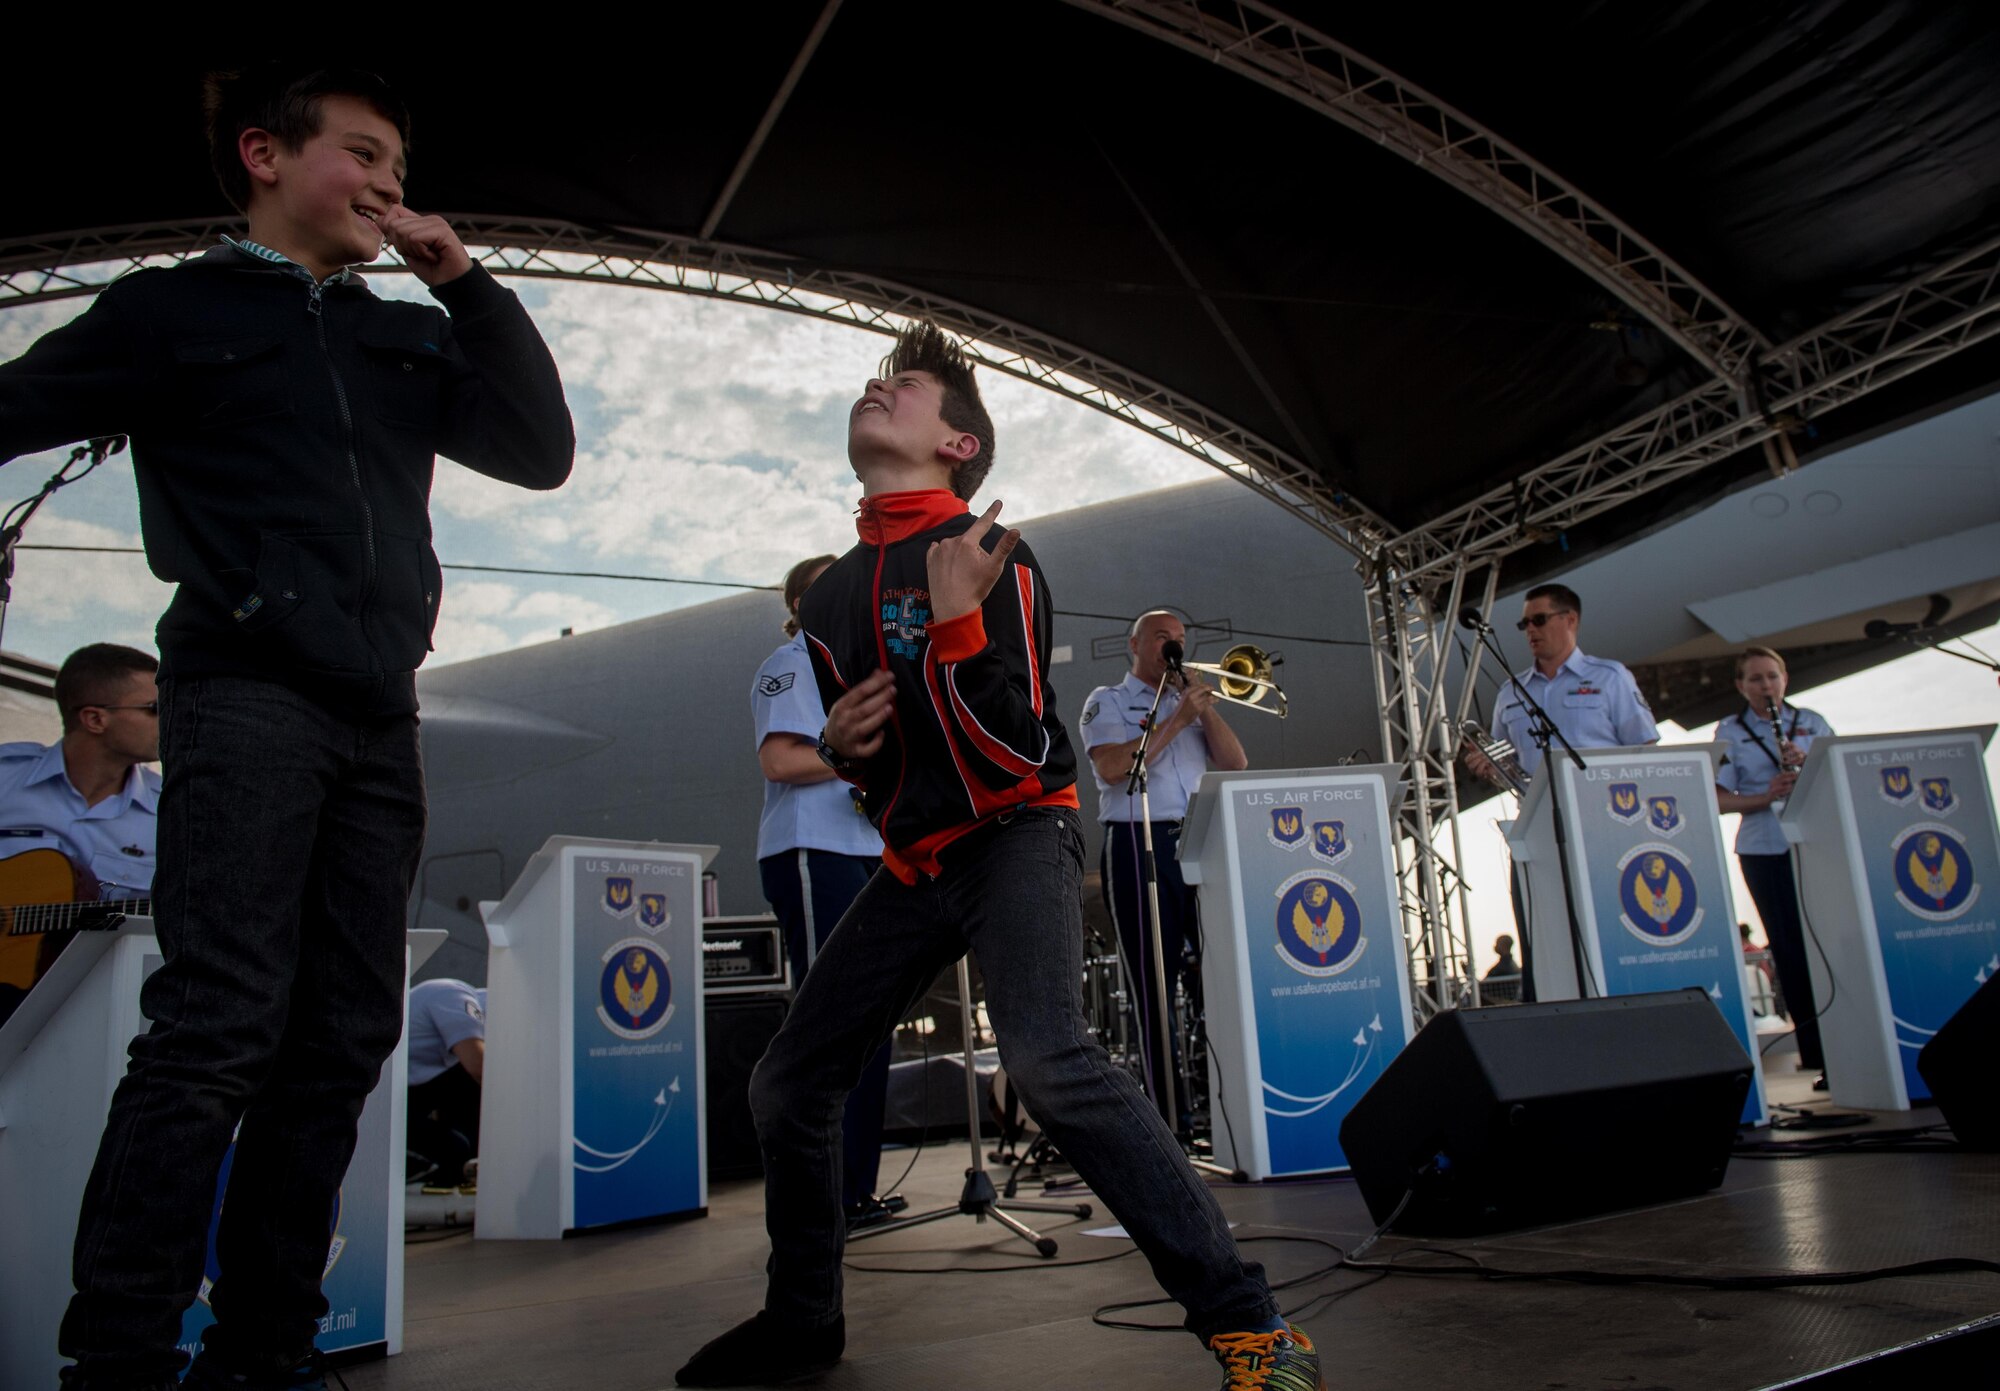 The U.S. Air Forces in Europe Band plays a show for the crowd at the Africa Aerospace and Defense Expo at Waterkloof Air Force Base, South Africa, Sept. 17, 2016. The U.S. military is exhibiting a C-17 Globemaster III, a KC-135 Stratotanker, a C-130J Super Hercules, an HC-130 King, and an MQ-9 Reaper. The aircraft come from various Air National Guard and Air Force Reserve Command units. The U.S. routinely participates in events like AADE to strengthen partnerships with regional partners. (U.S. Air Force photo by Tech. Sgt. Ryan Crane)